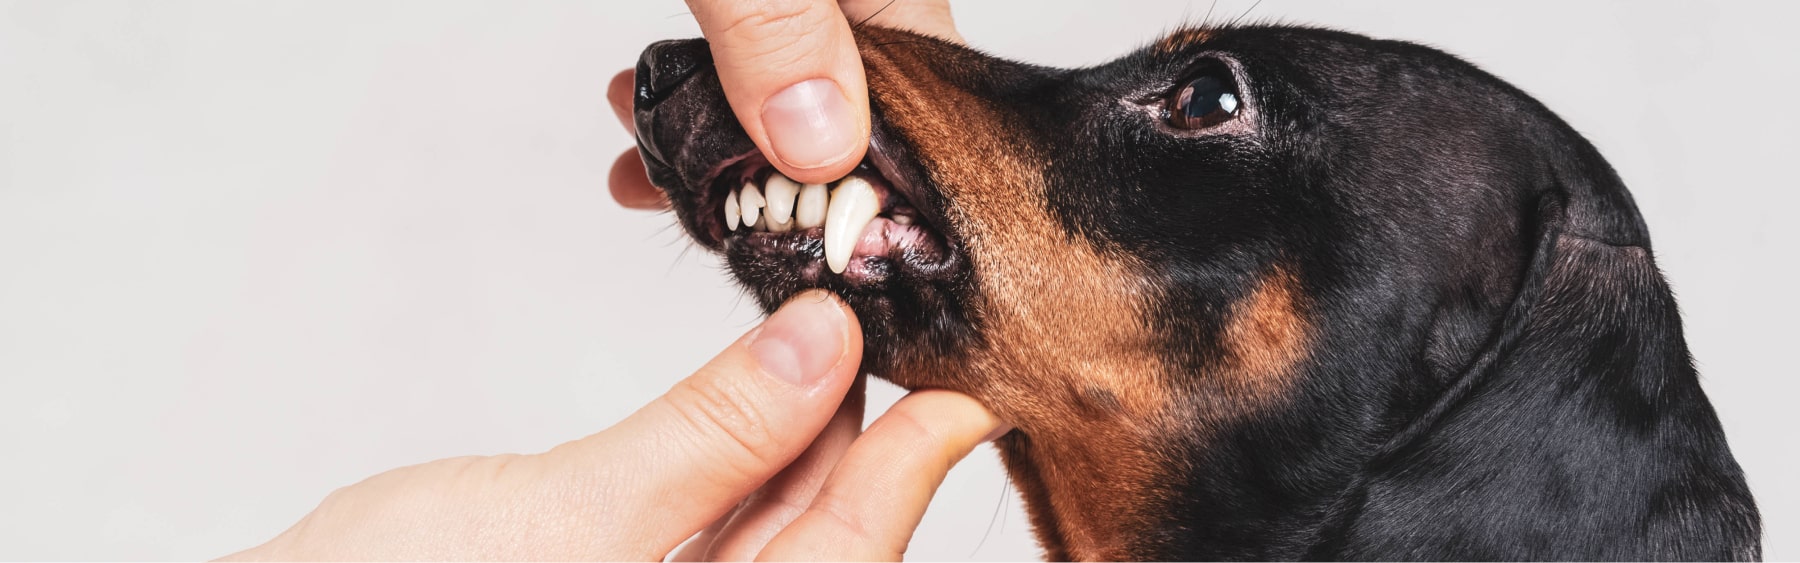 Is Non-Anesthetic Teeth Cleaning Safe for Dogs?